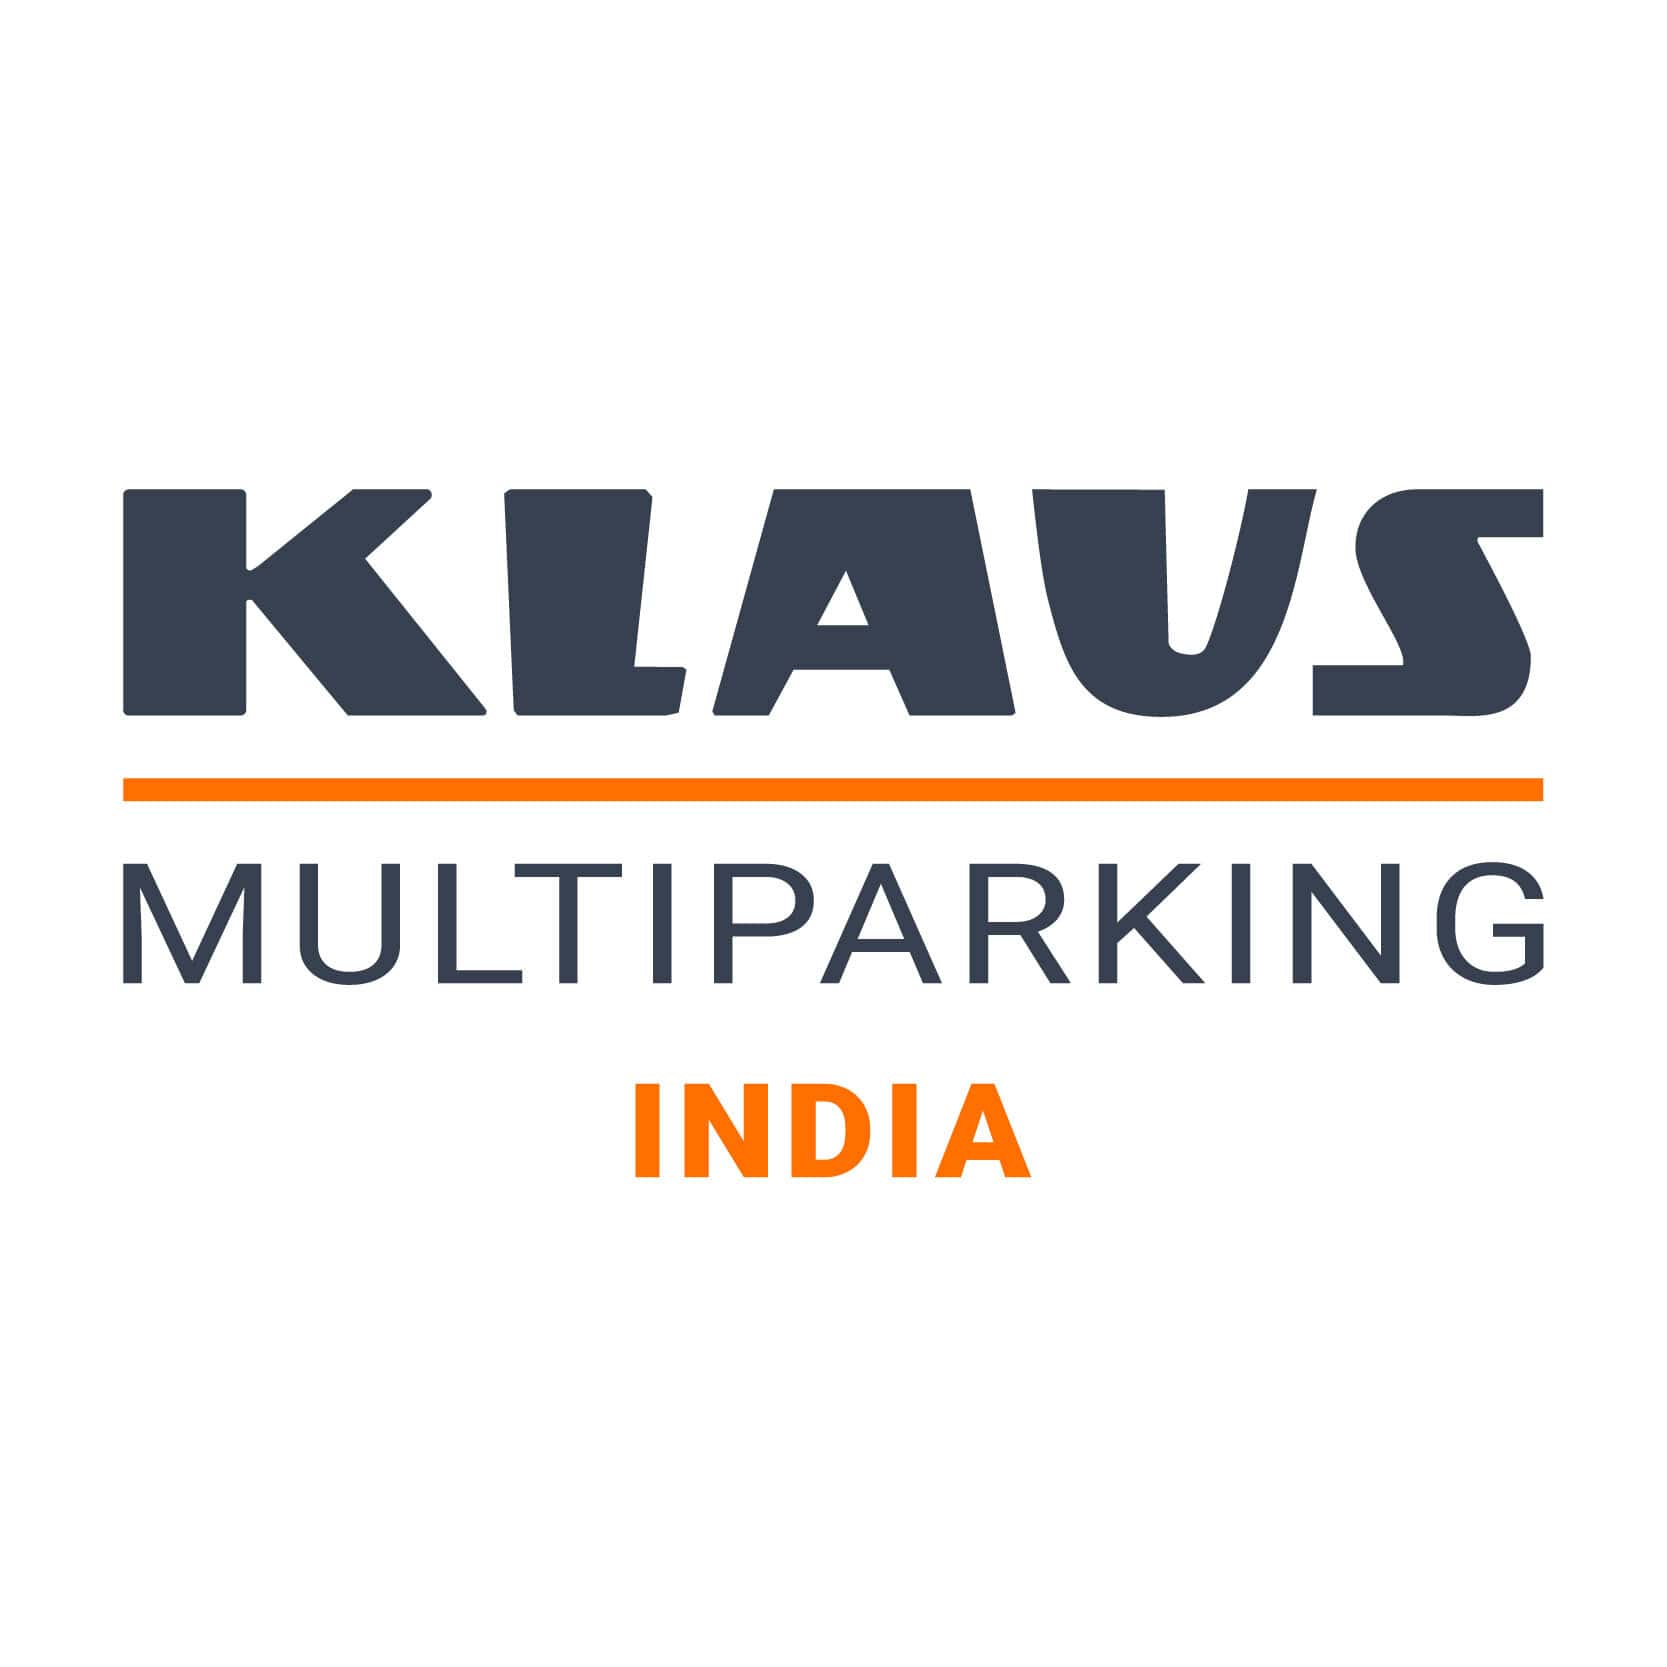 Best Car Parking Systems in India  KLAUS Multiparking - Maharashtra - Pune ID1553063